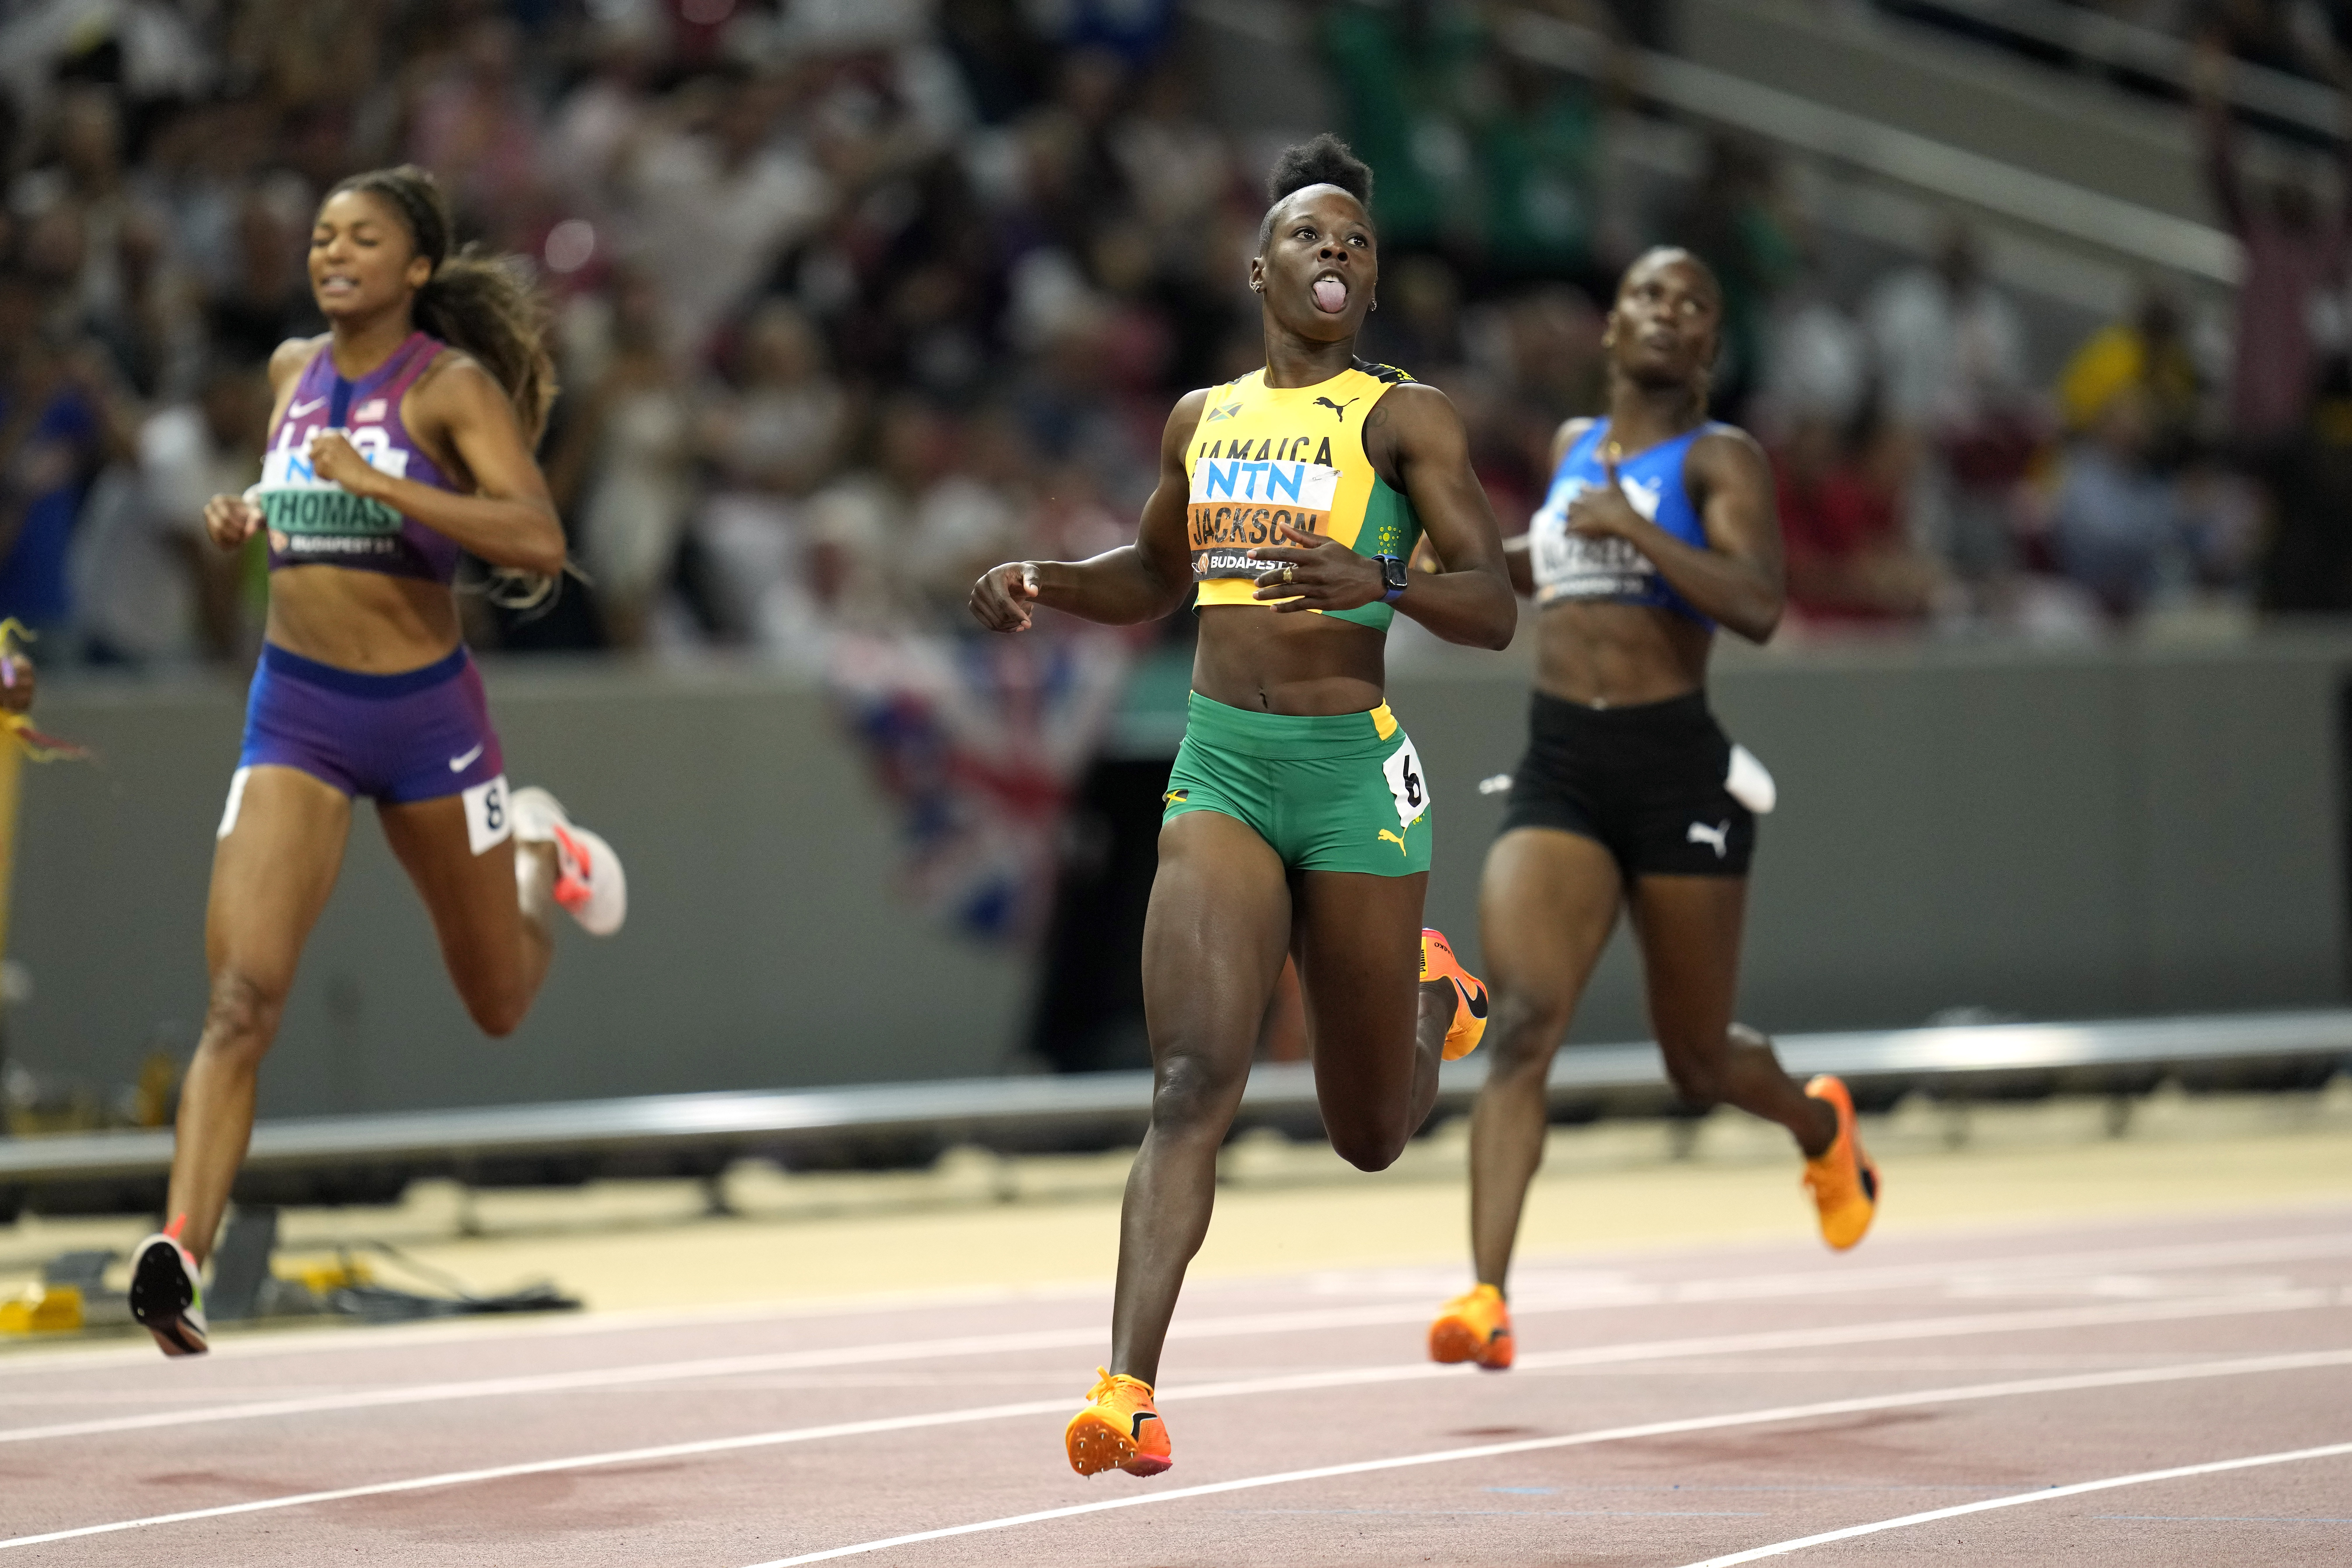 Jamaica’s Shericka Jackson ran the second fastest time in history, a 21.41, to win her second straight title at 200 meters.